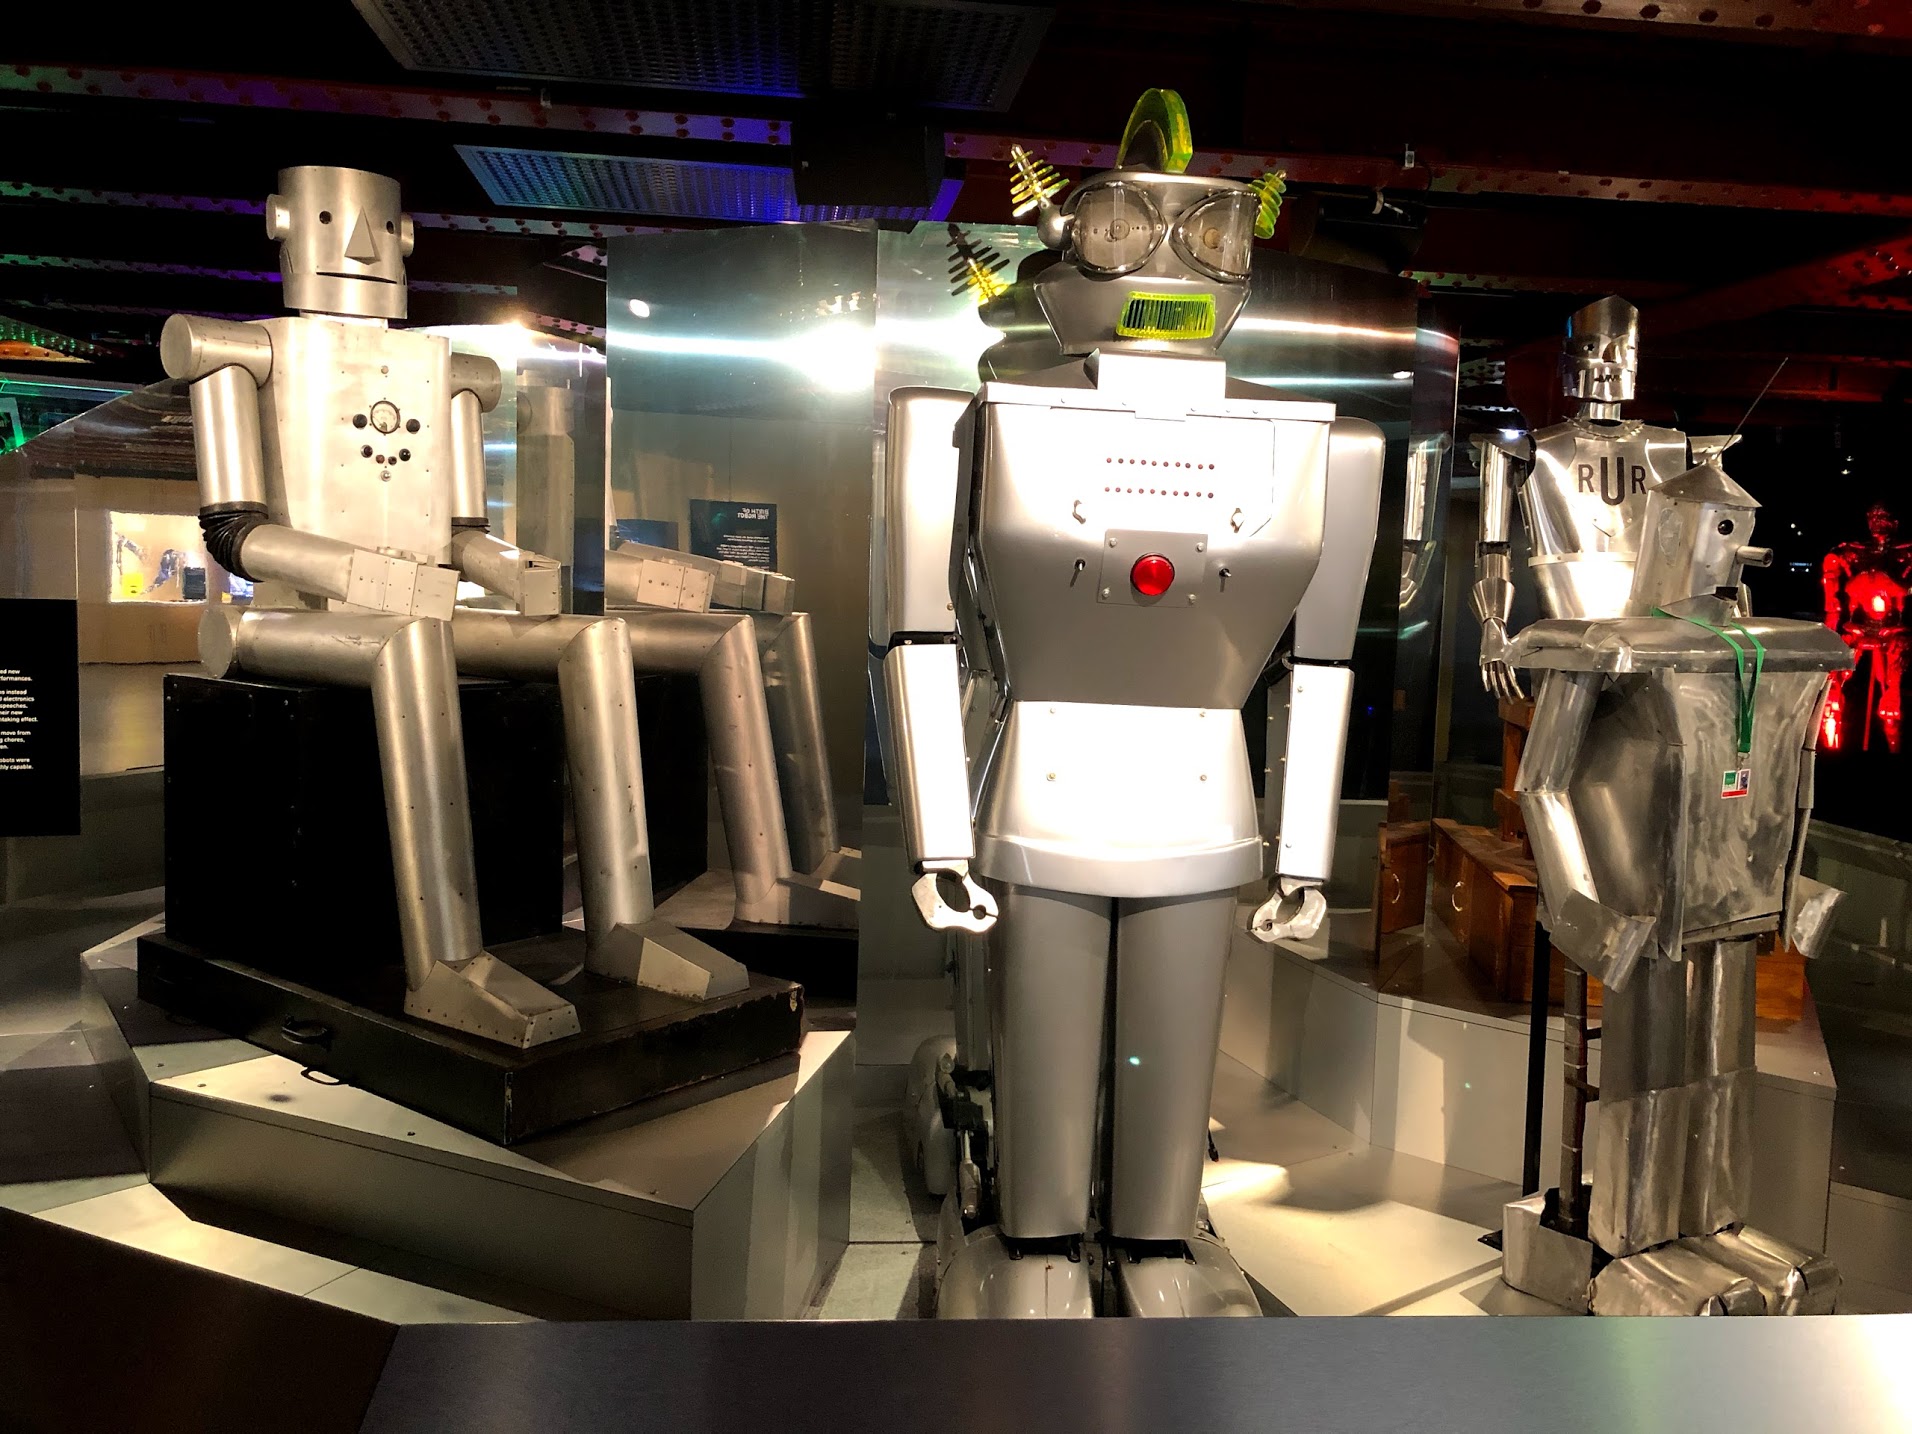 Robots on display at Manchester Museum of Science and Industry